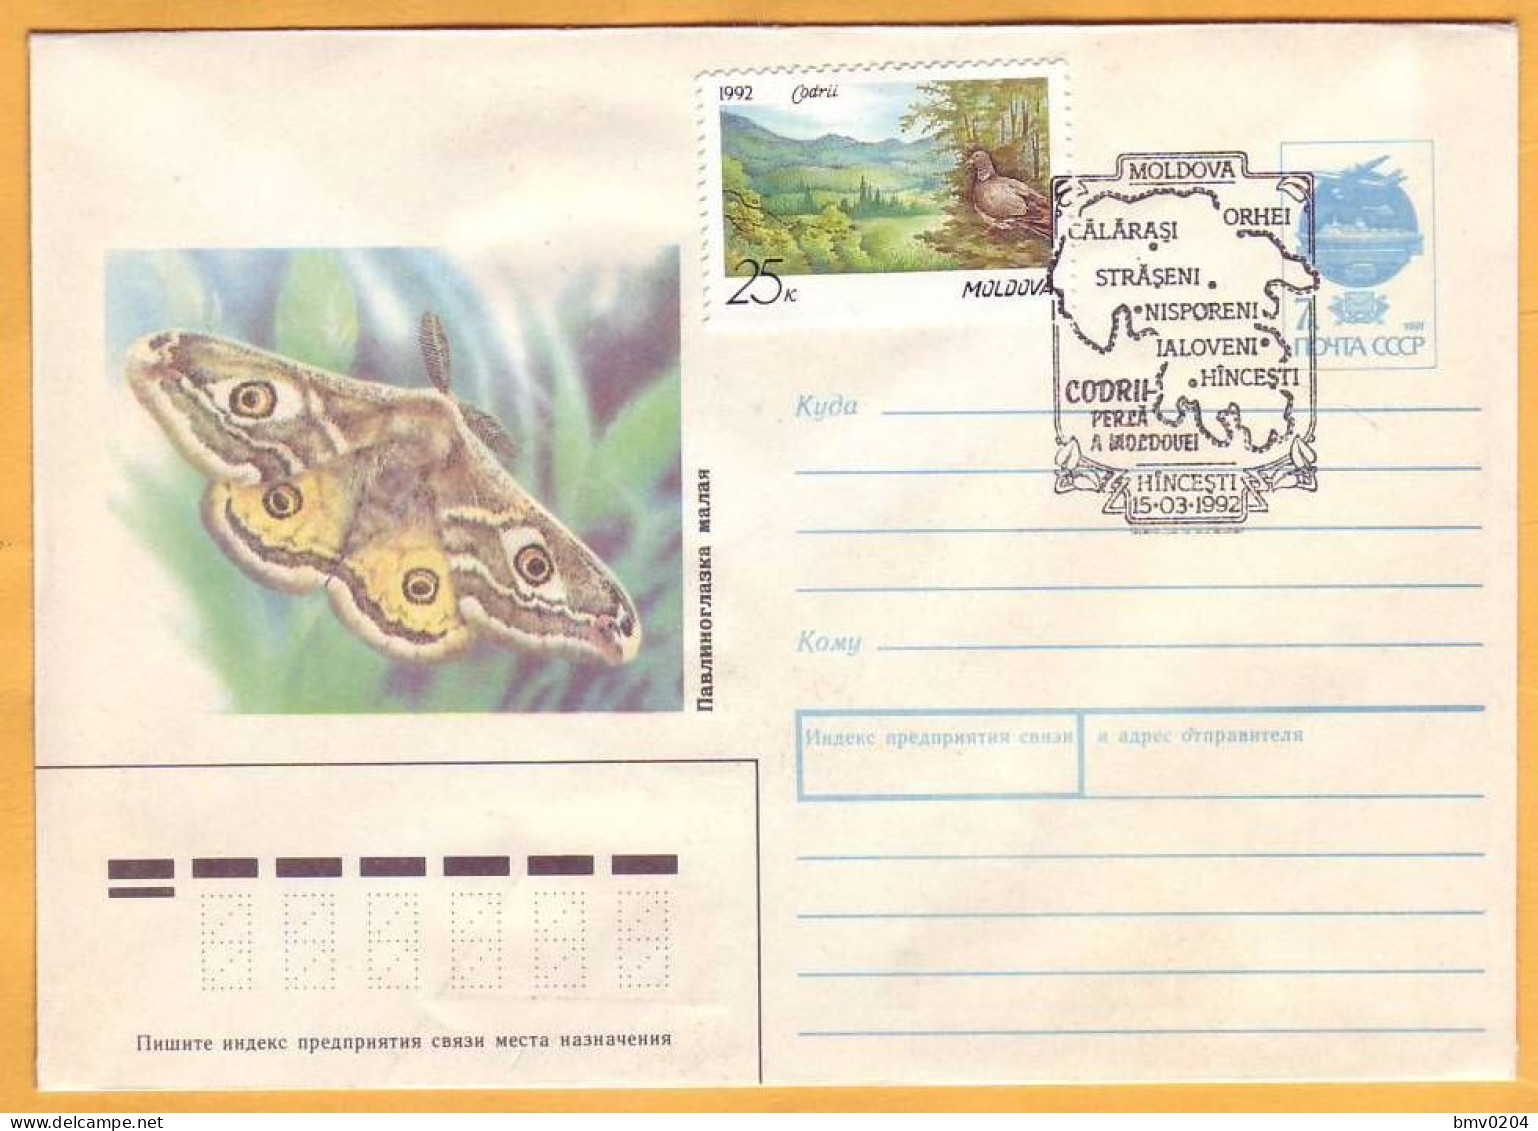 1992 Moldova Moldavie 3 Lots Special Cancellations Kodrii Moldova. Forest. Wood Pigeon Butterfly (1 Cover+2 Postcard) - Gallináceos & Faisanes